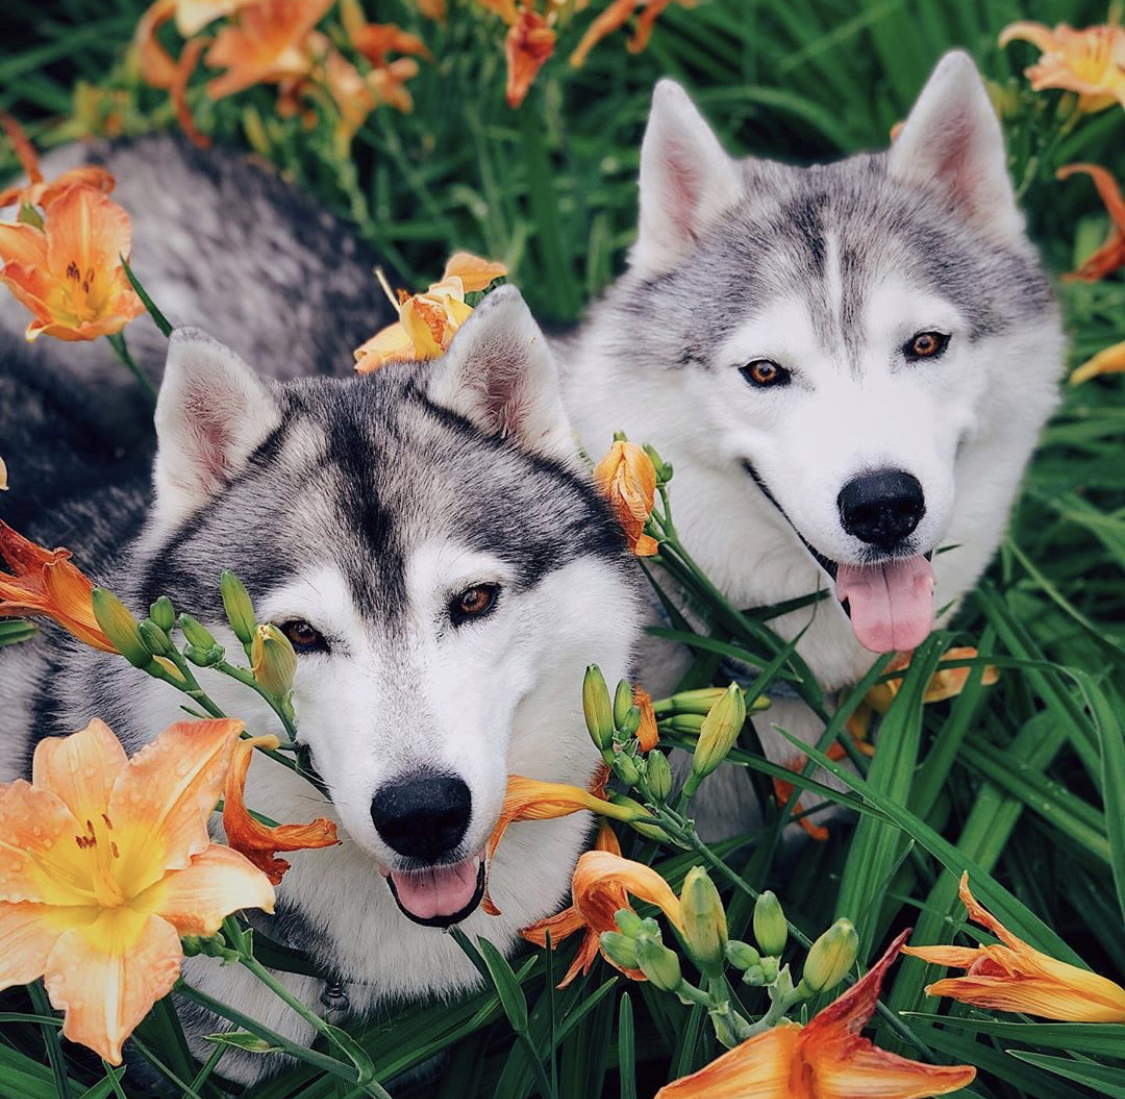 two Huskys in the garden along with the orange flowers